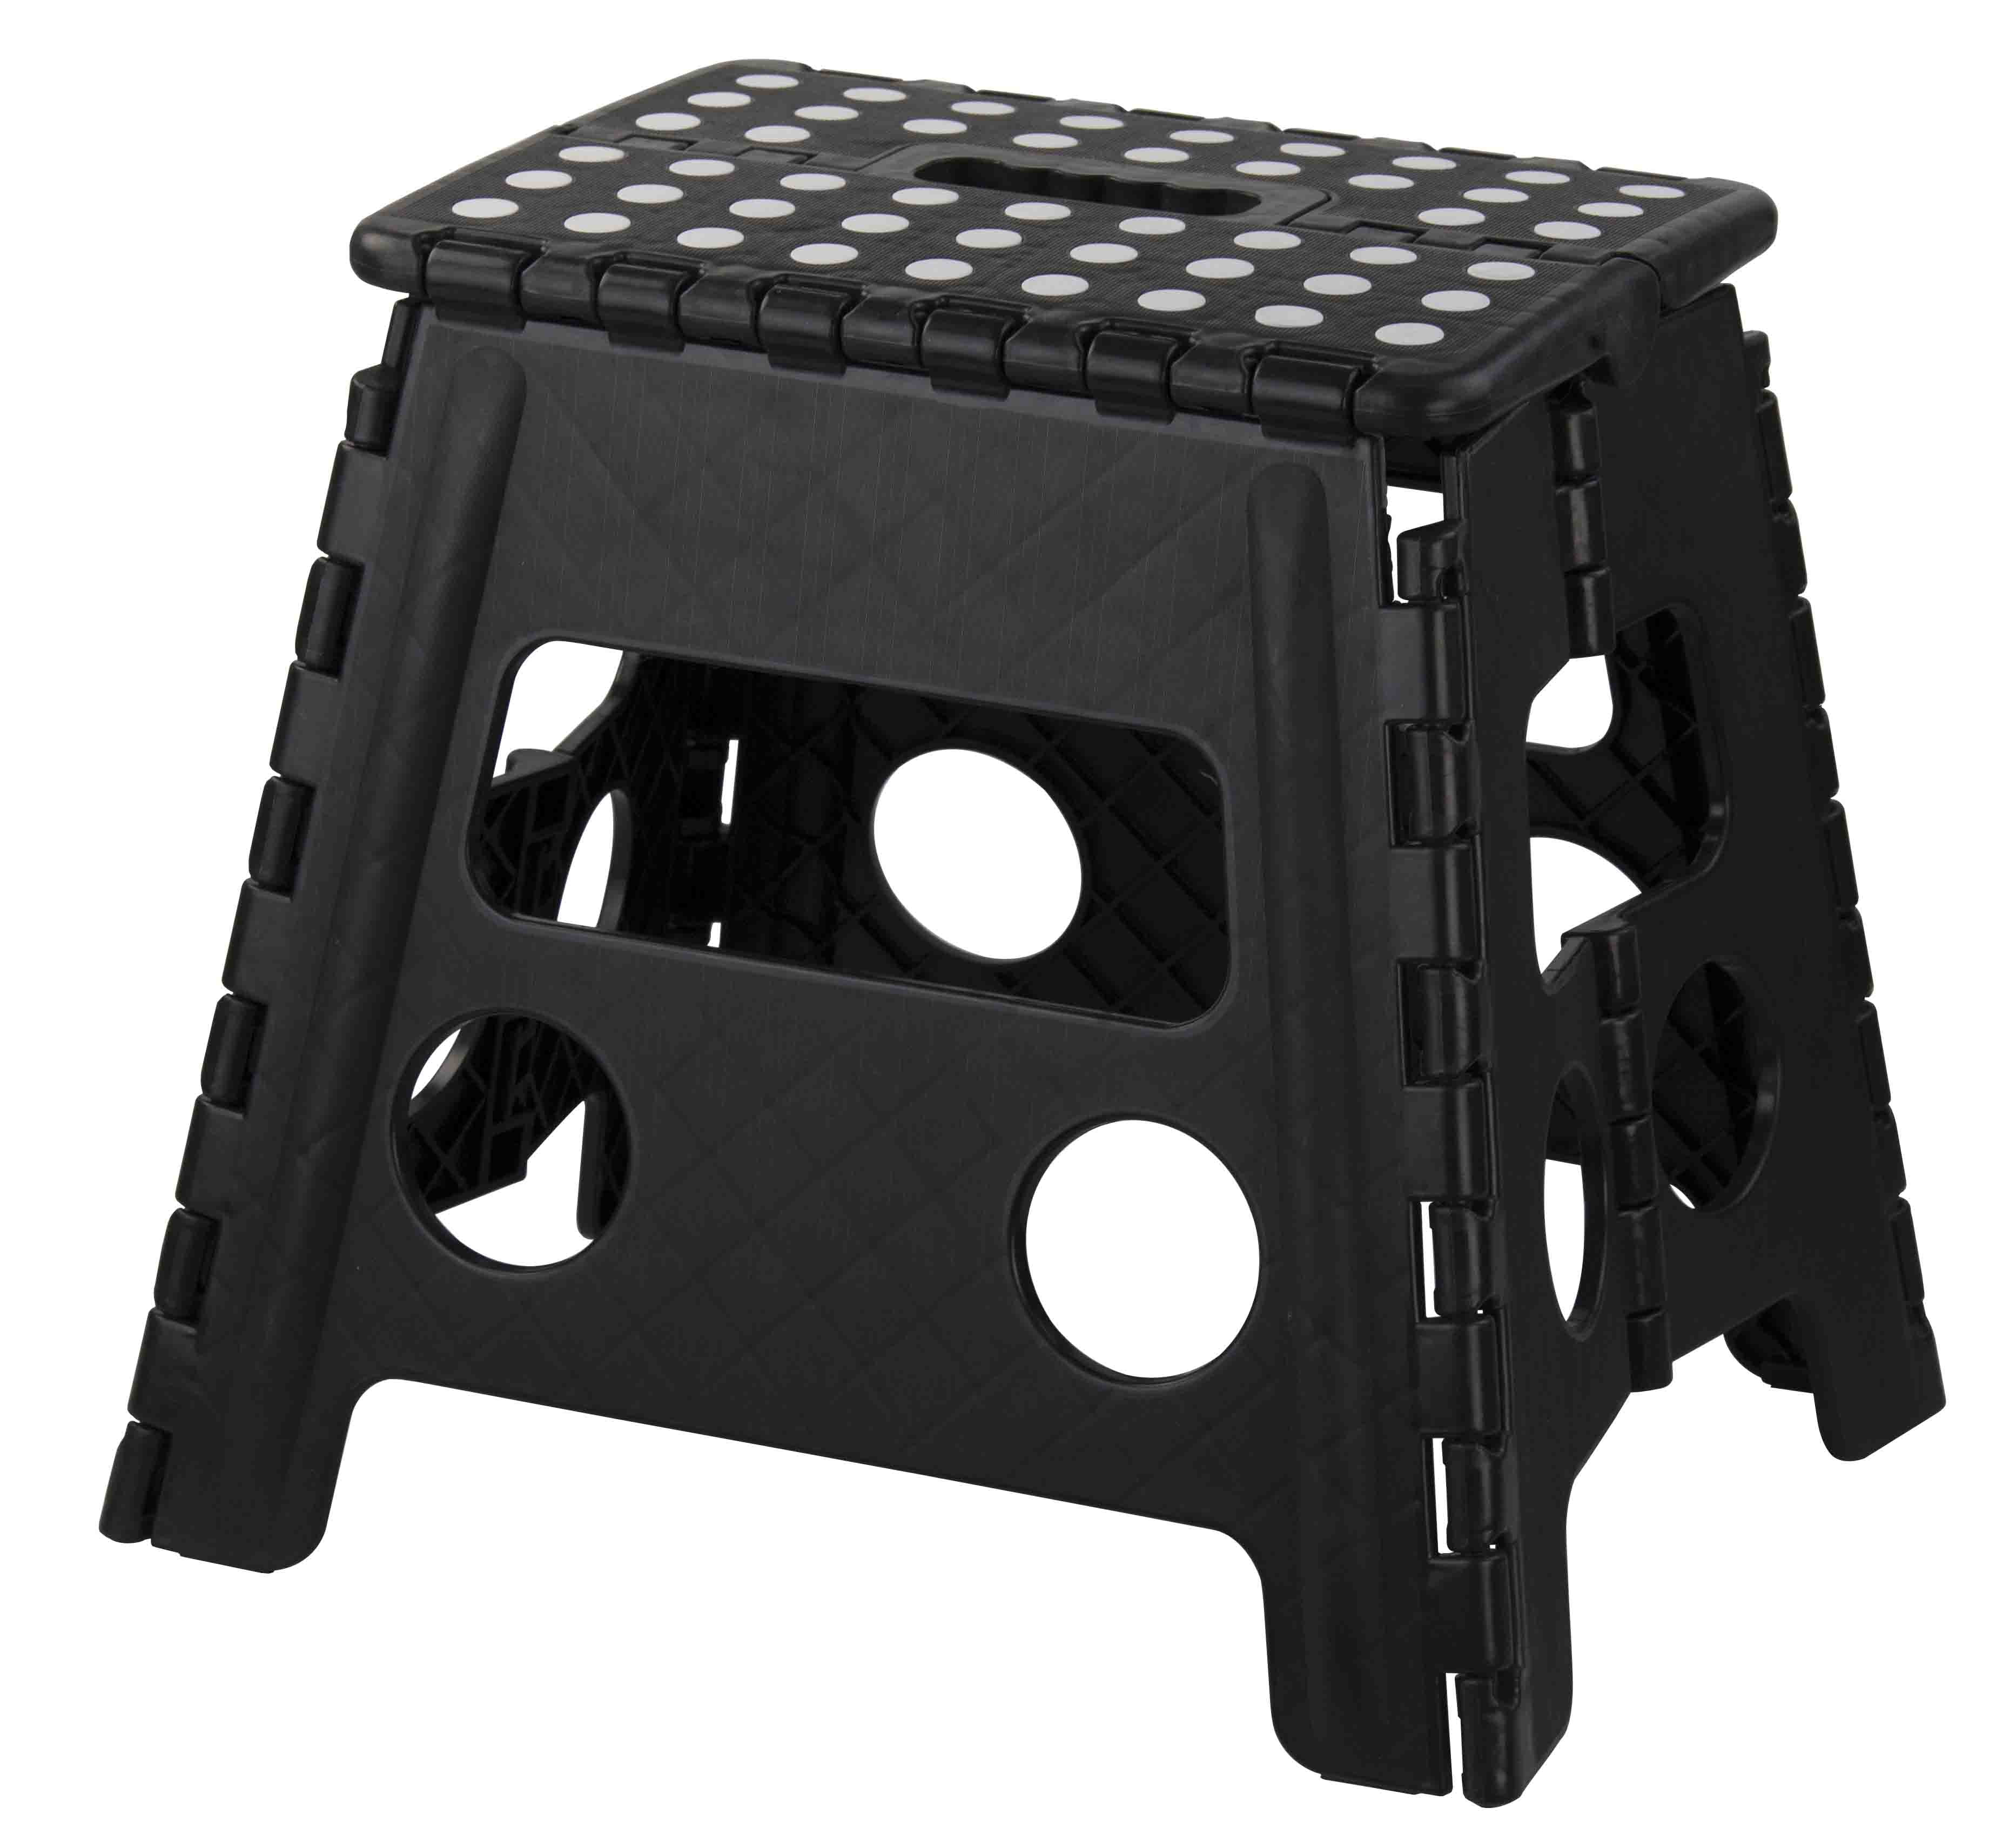 Plastic Non Slip Folding Foot Step Stool for Multi Purpose Collapsible 